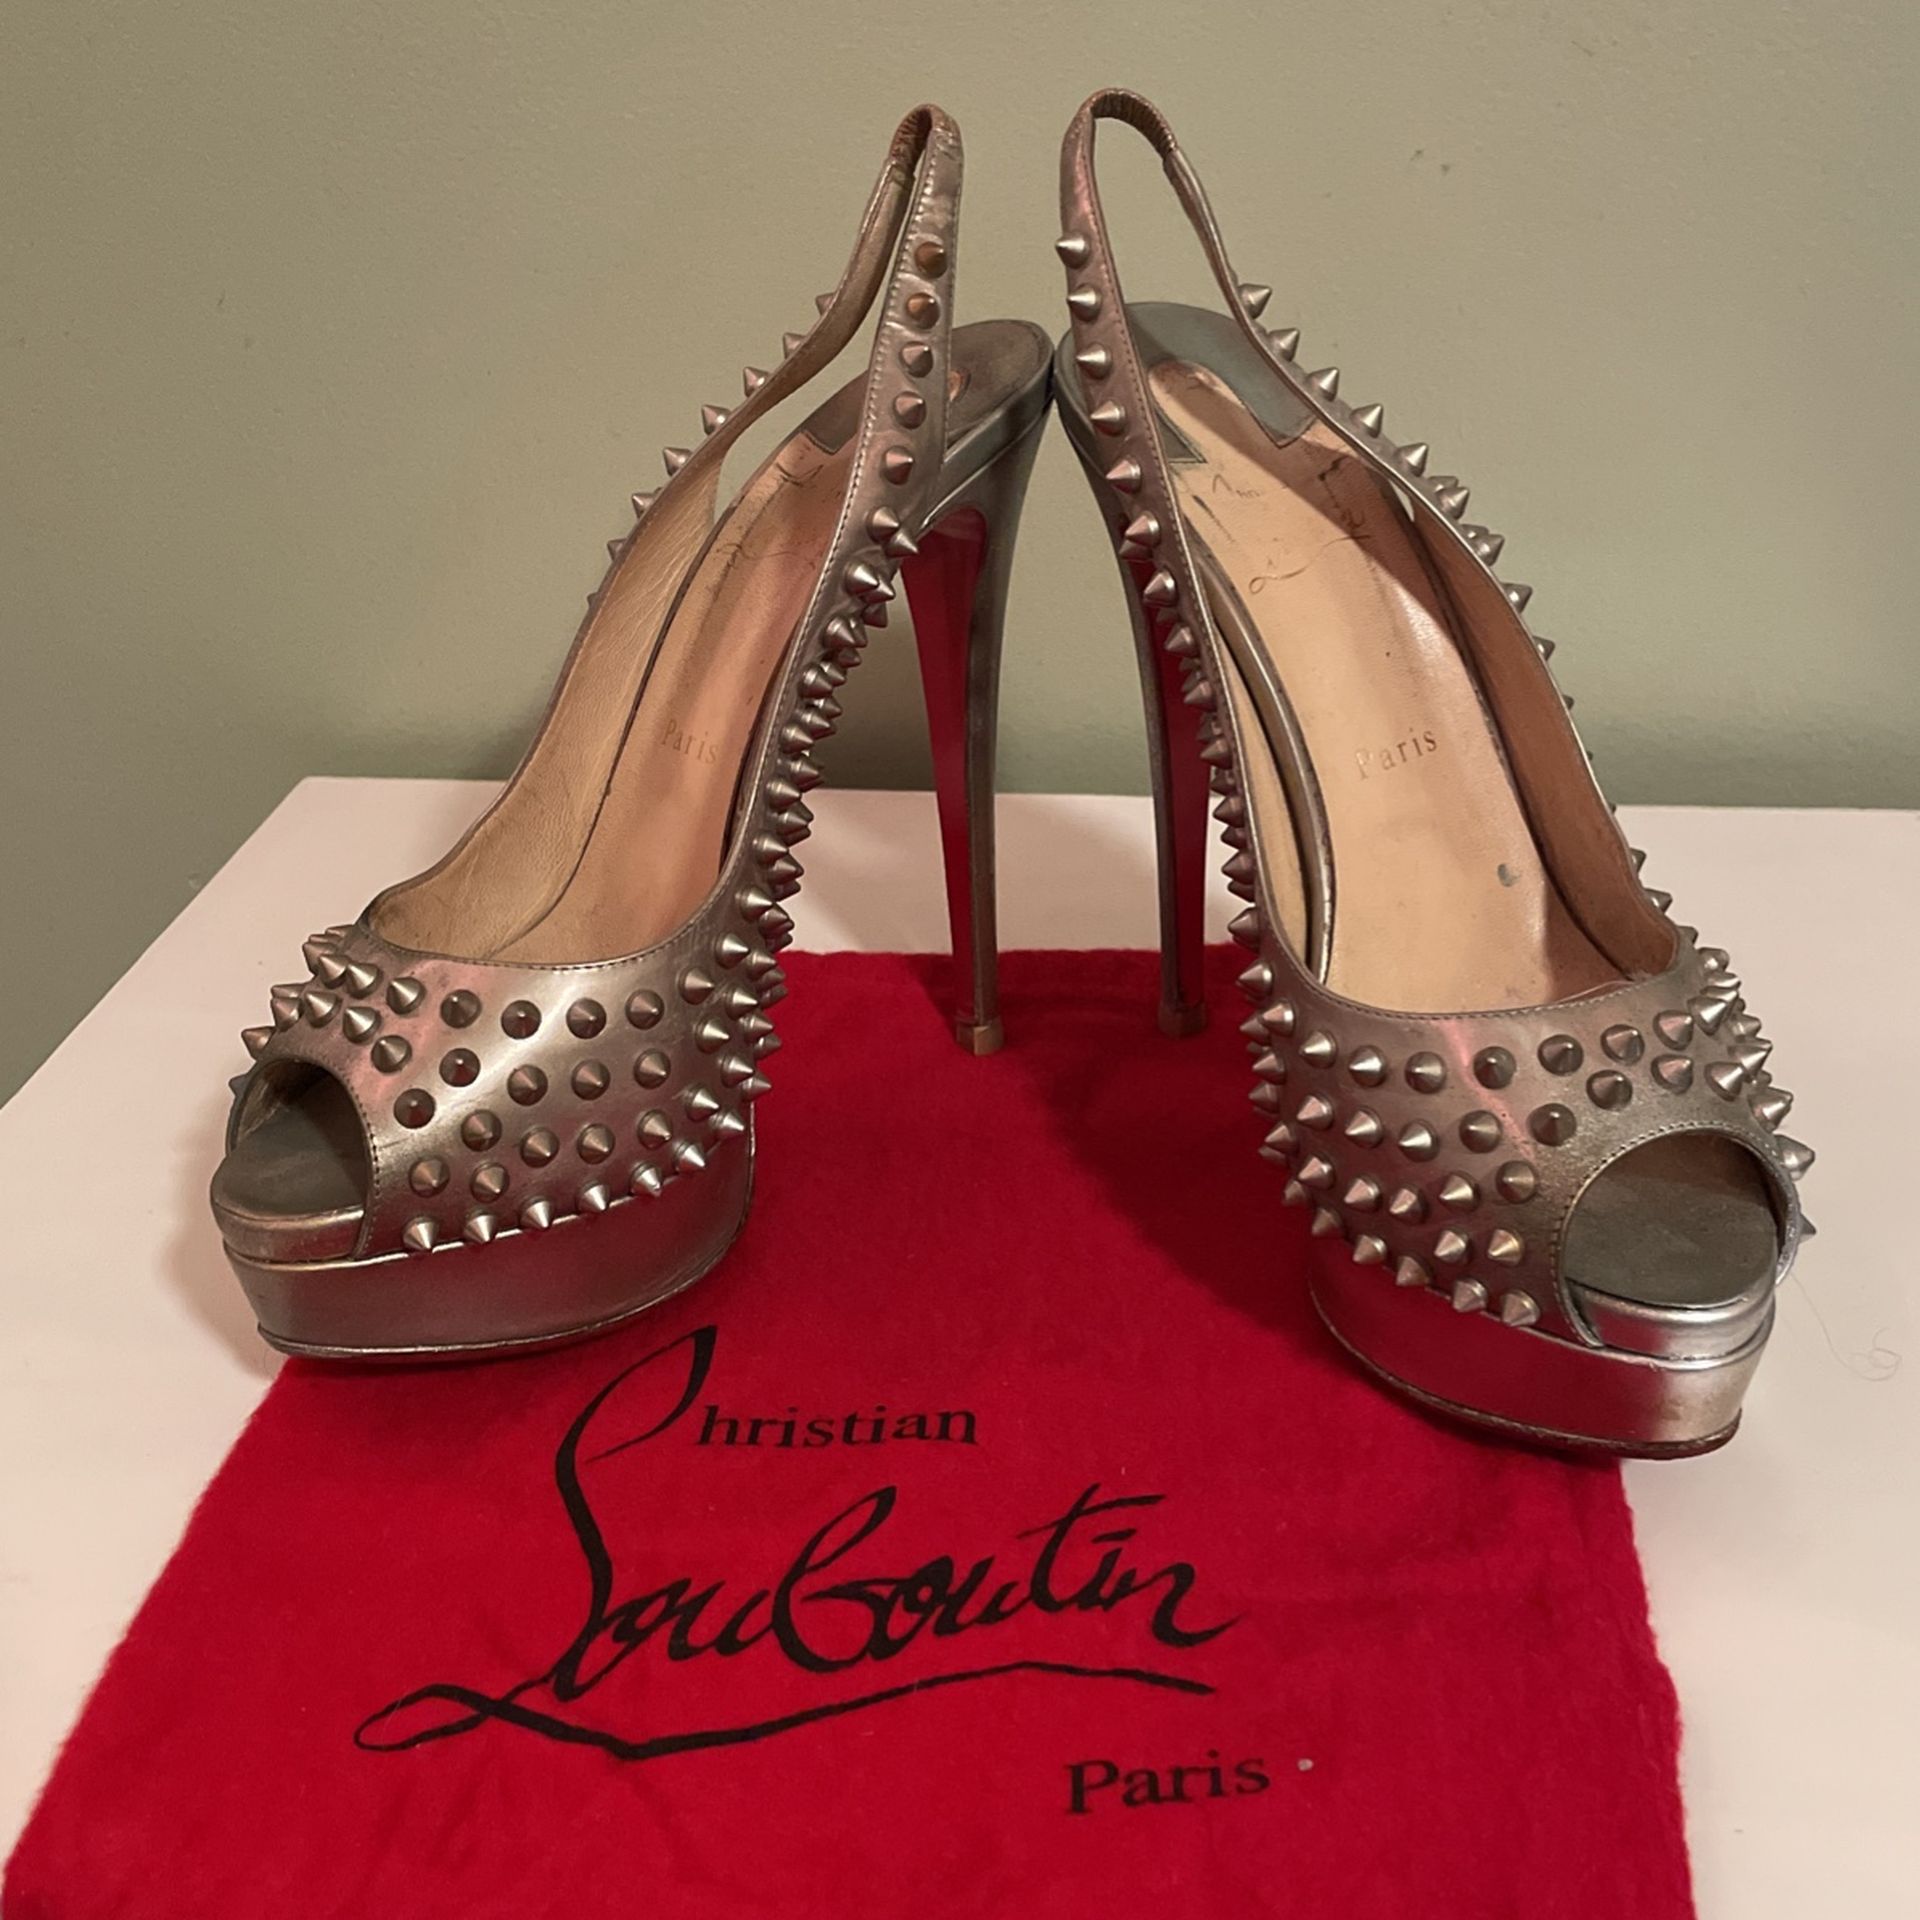 Spiked Christian Louboutin